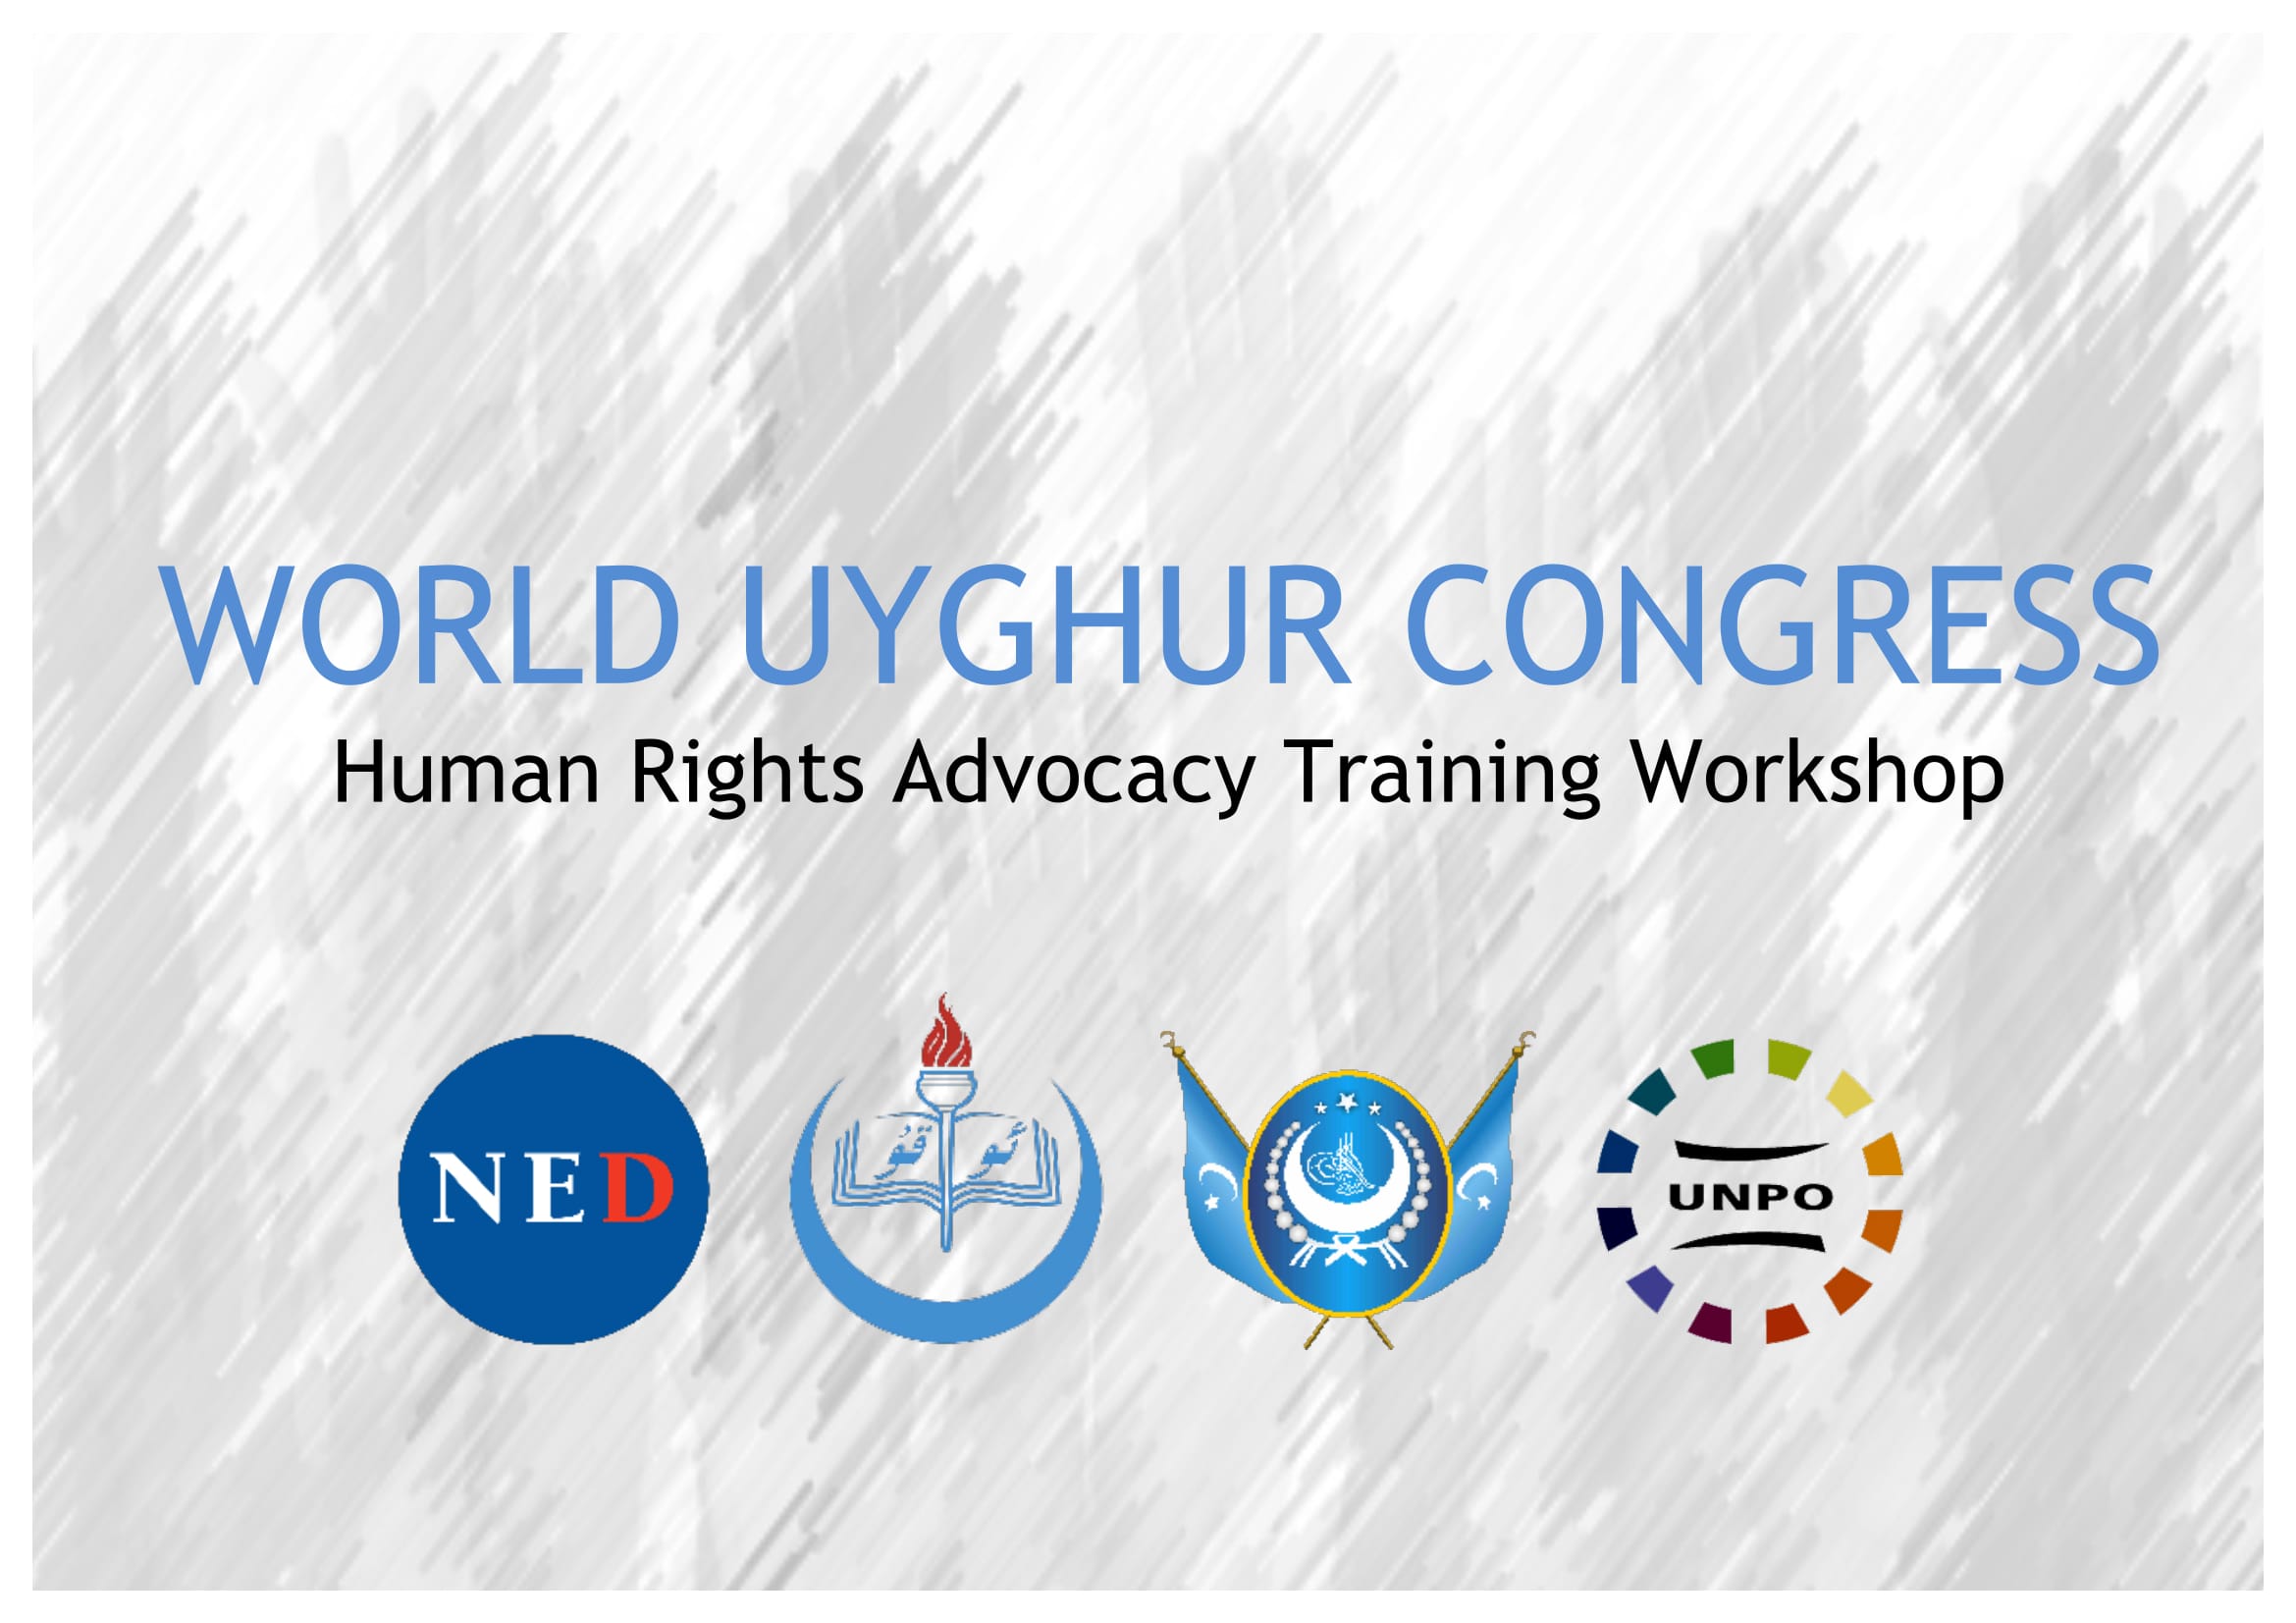 World Uyghur Congress Stockholm Youth Advocacy Training Seminar Concludes